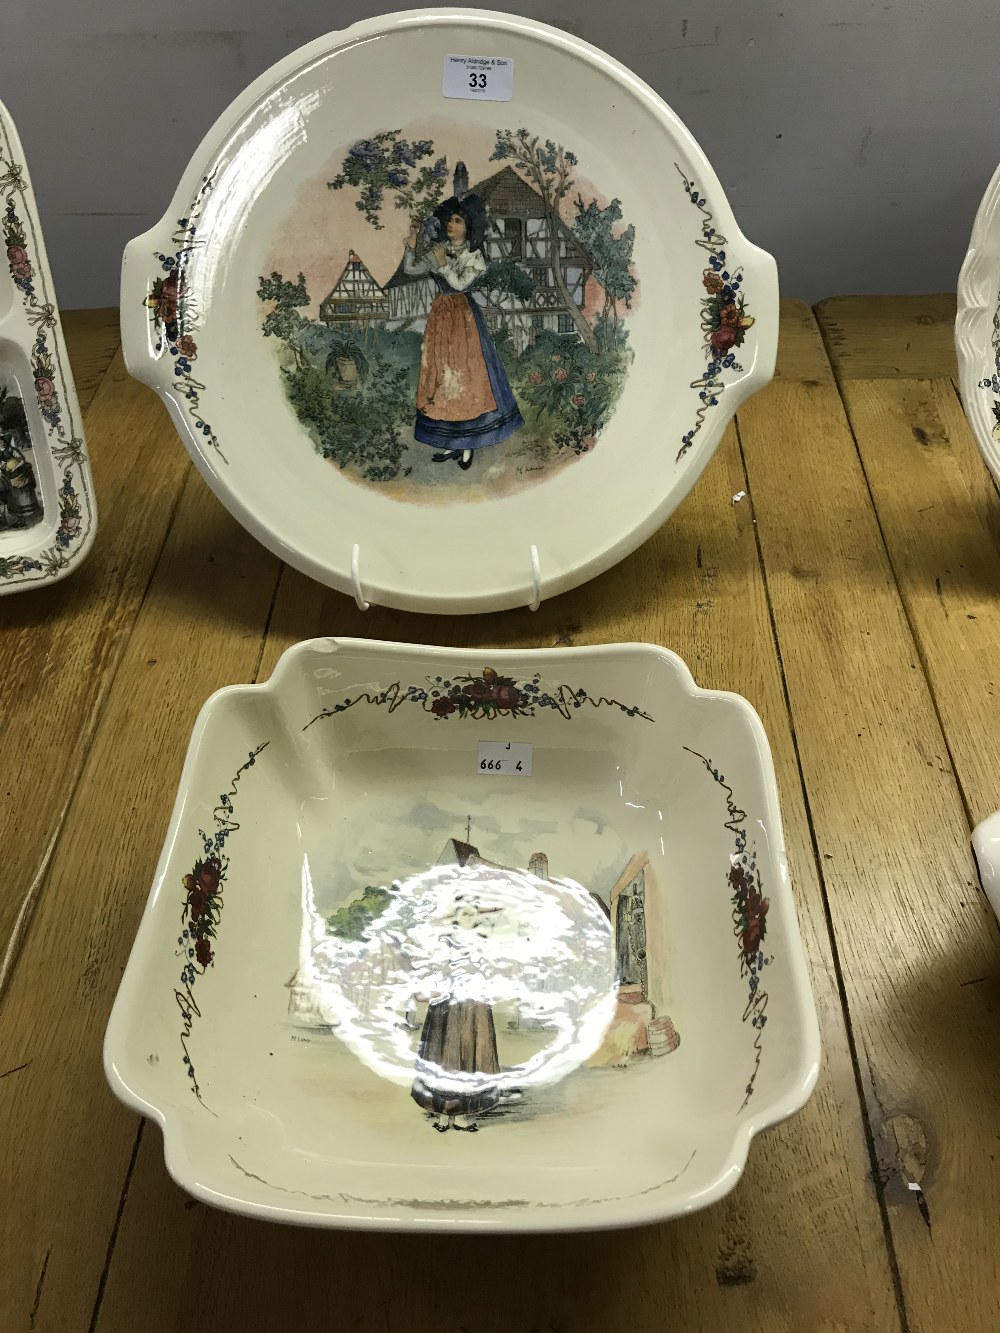 20th cent. French ceramics by Sarreguemines in the Obernai pattern dinner service. Includes 10ins